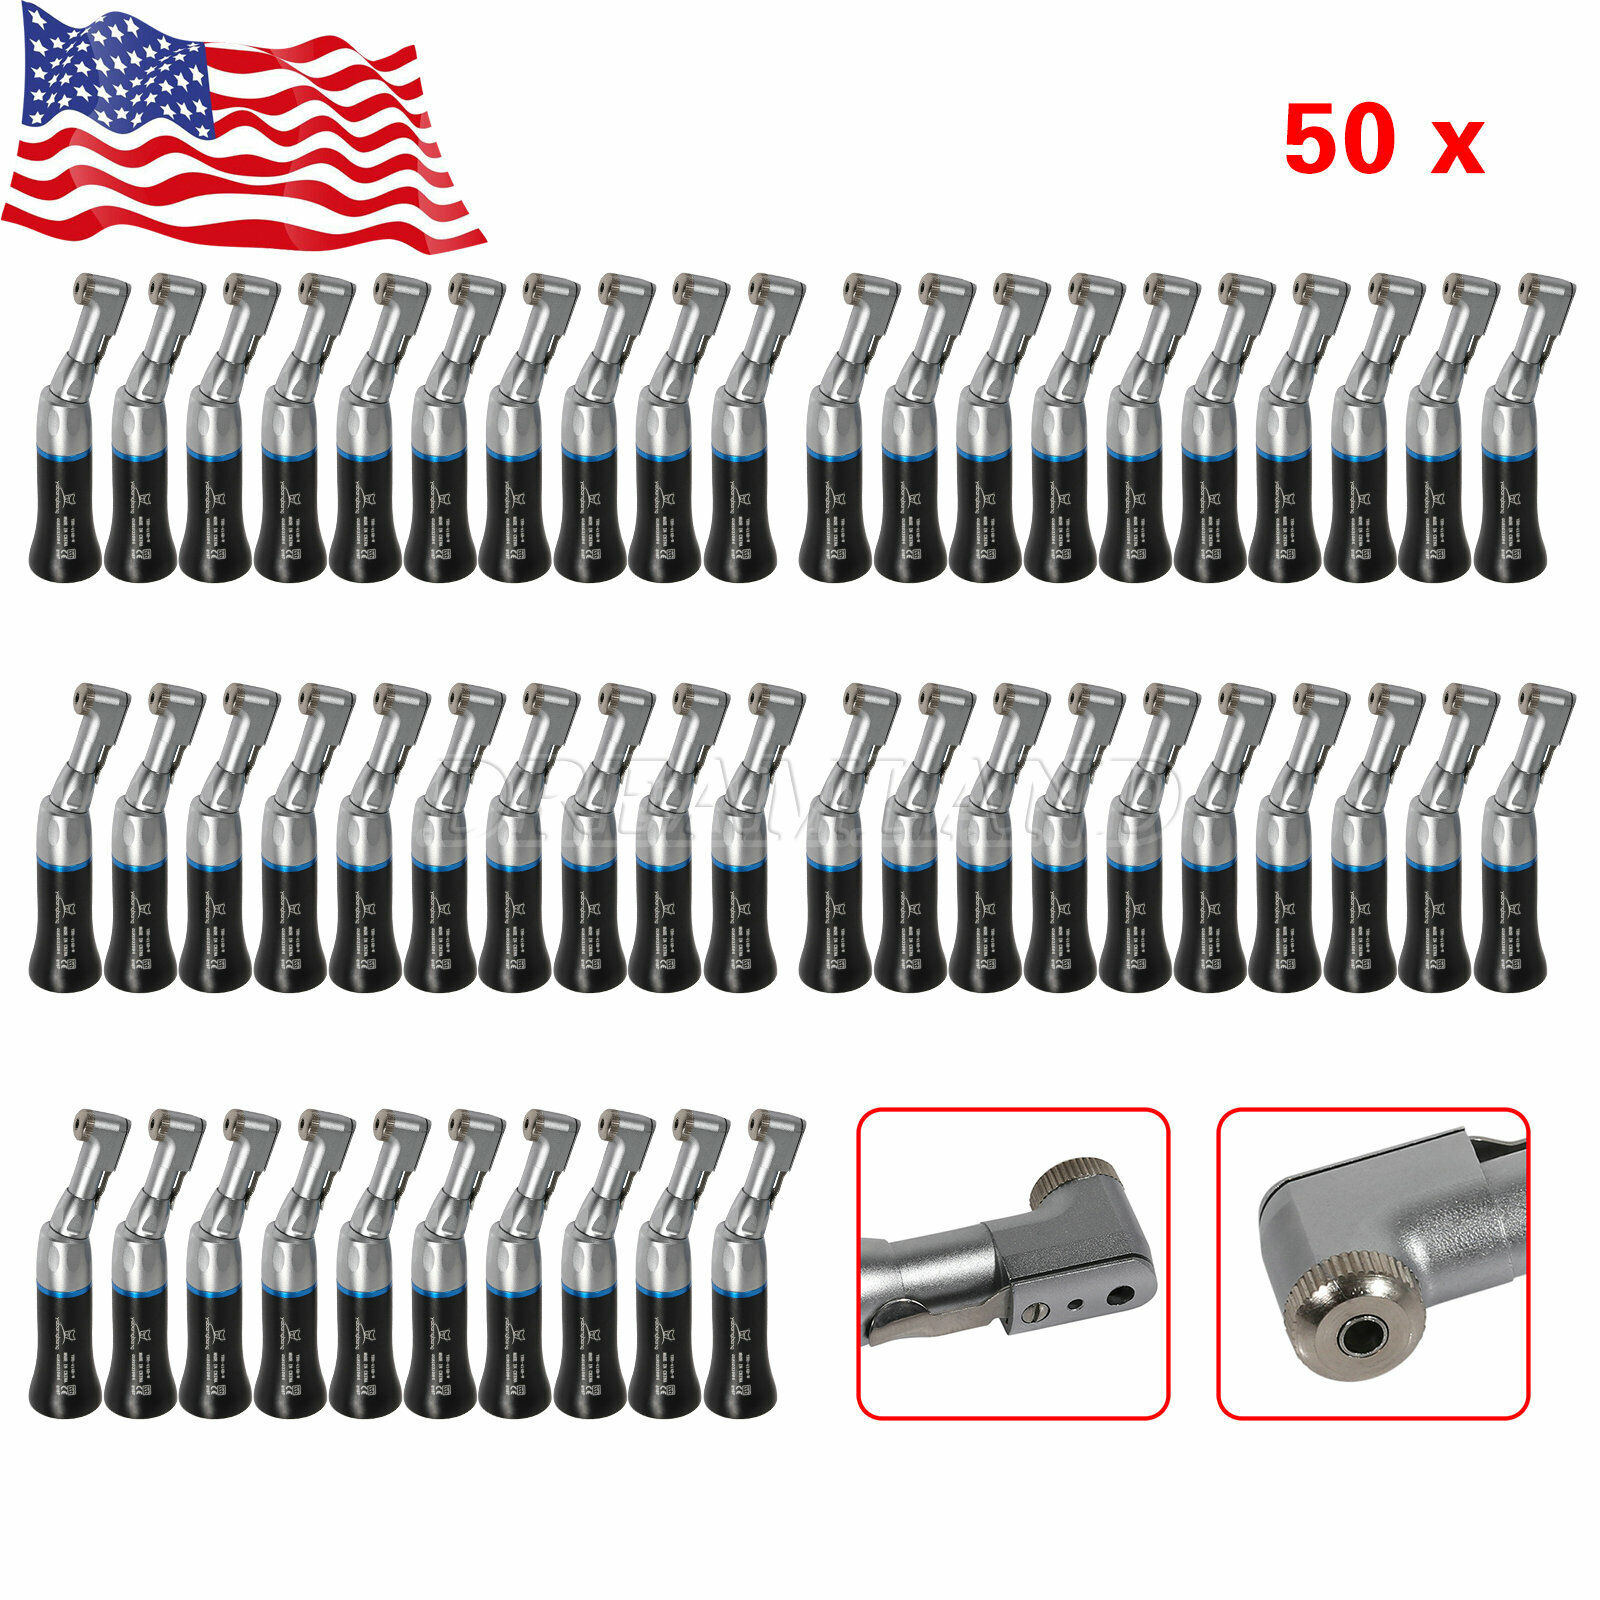 50pcs NSK Style Dental Slow Low Speed Handpiece Contra angle Latch Wrench BLACK